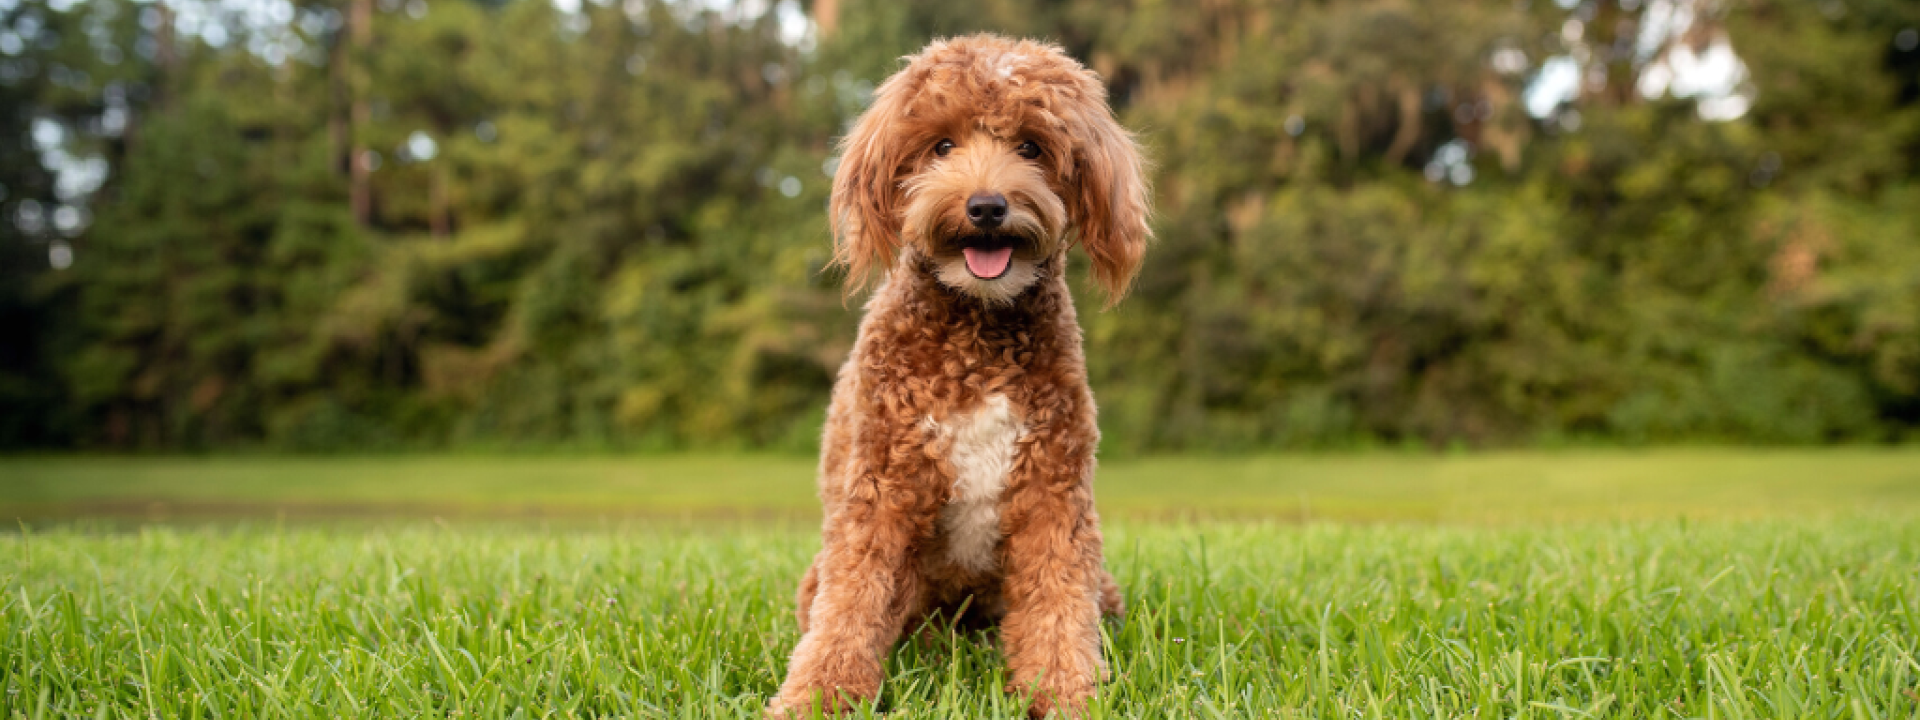 Mini goldendoodle, golden doodle puppy on green grass